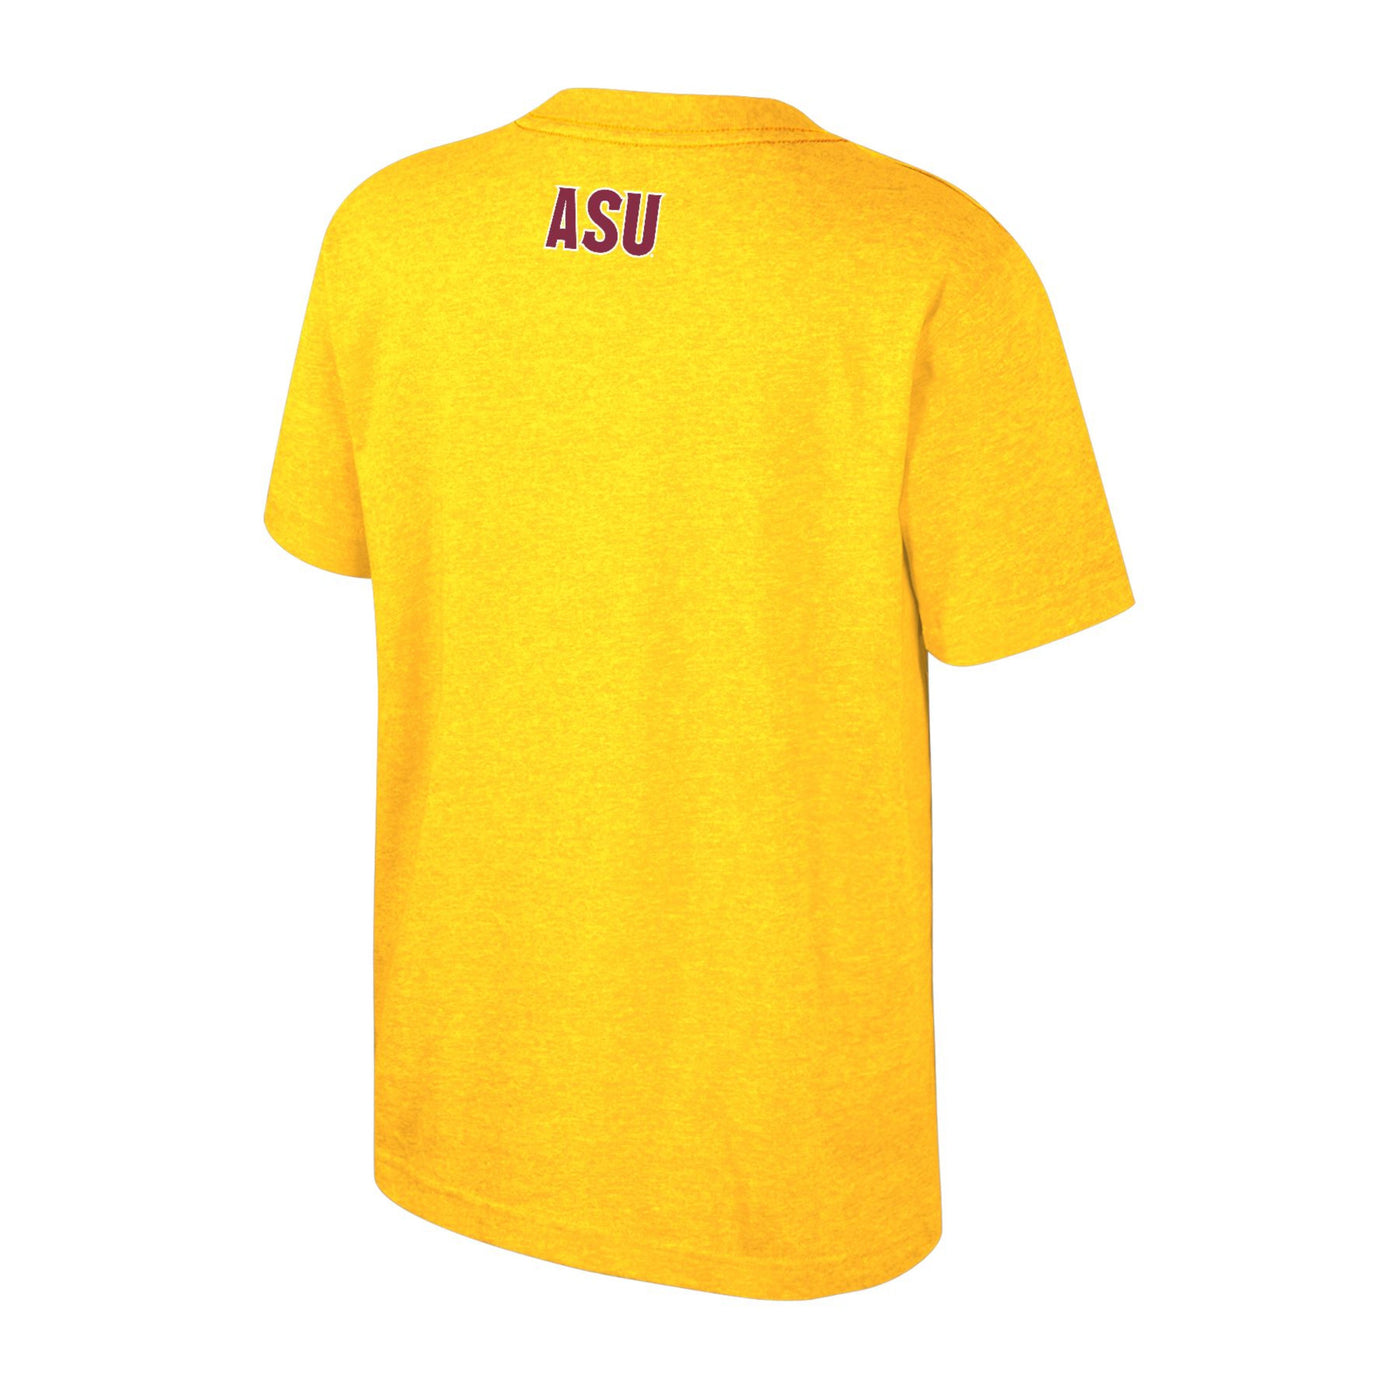 backside of youth ASU gold tee with text 